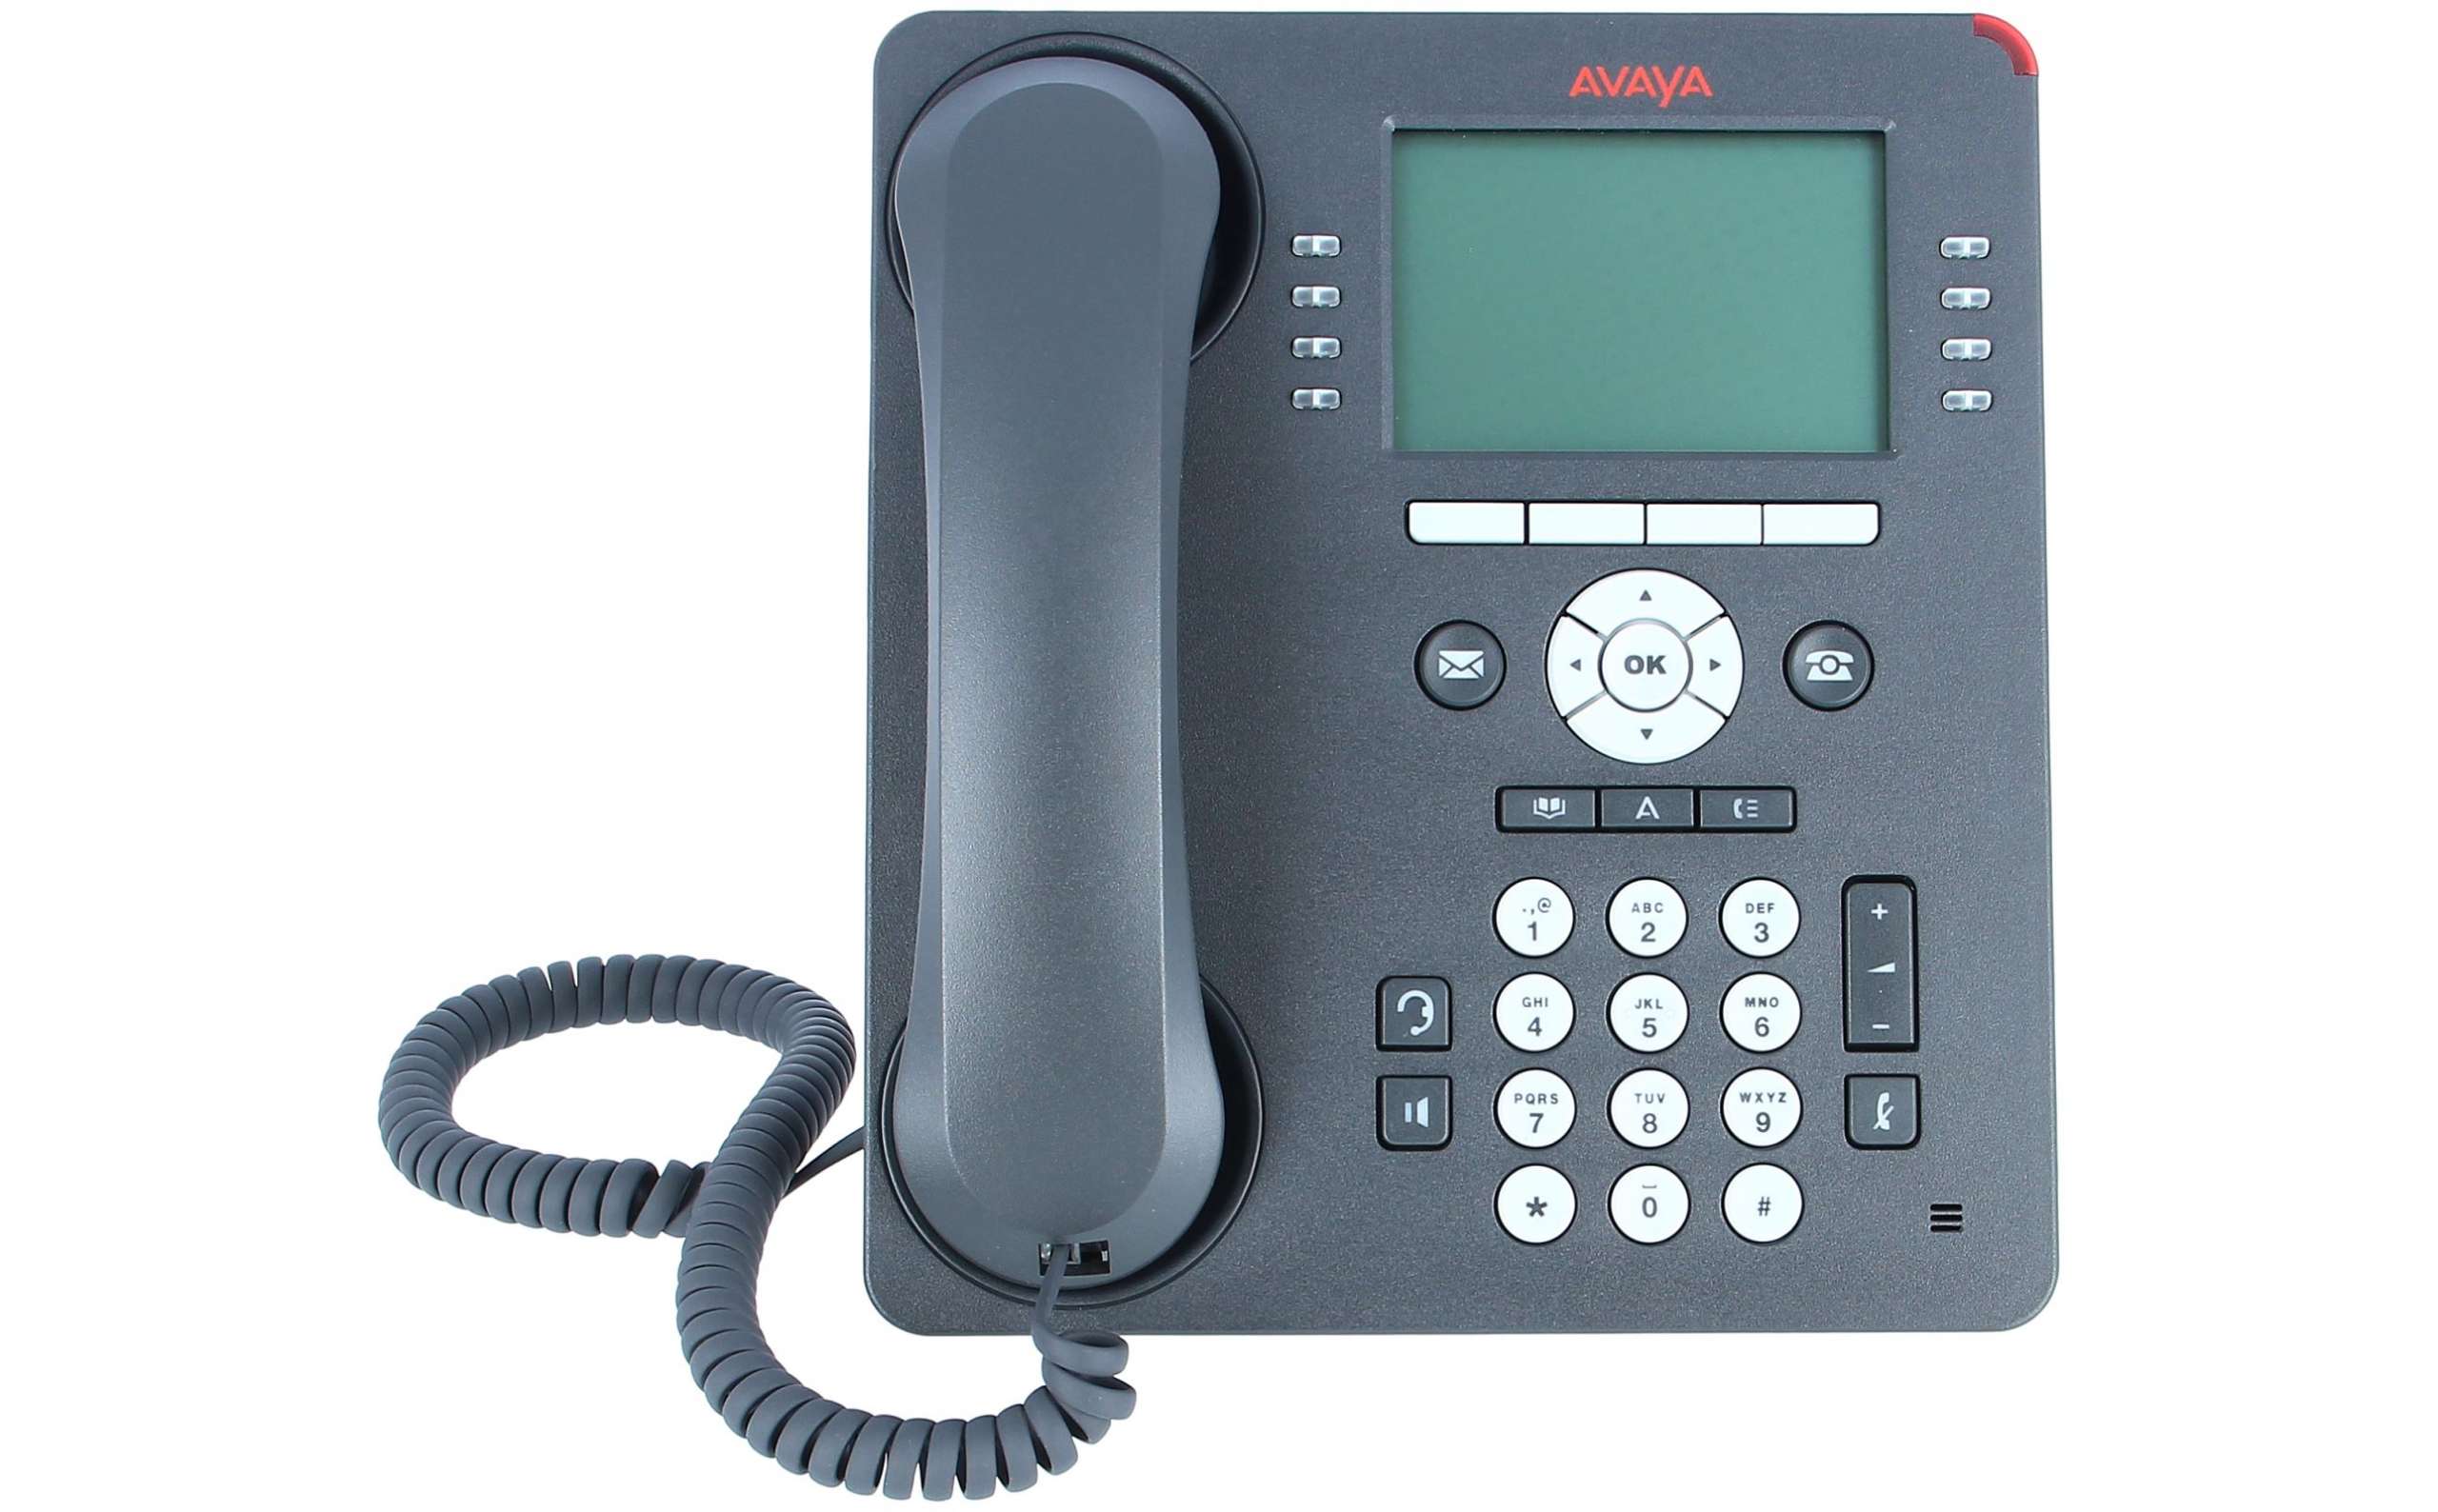 prices - refurbished online low new GRY and buy IP PHONE 9608G 700505424 Avaya -